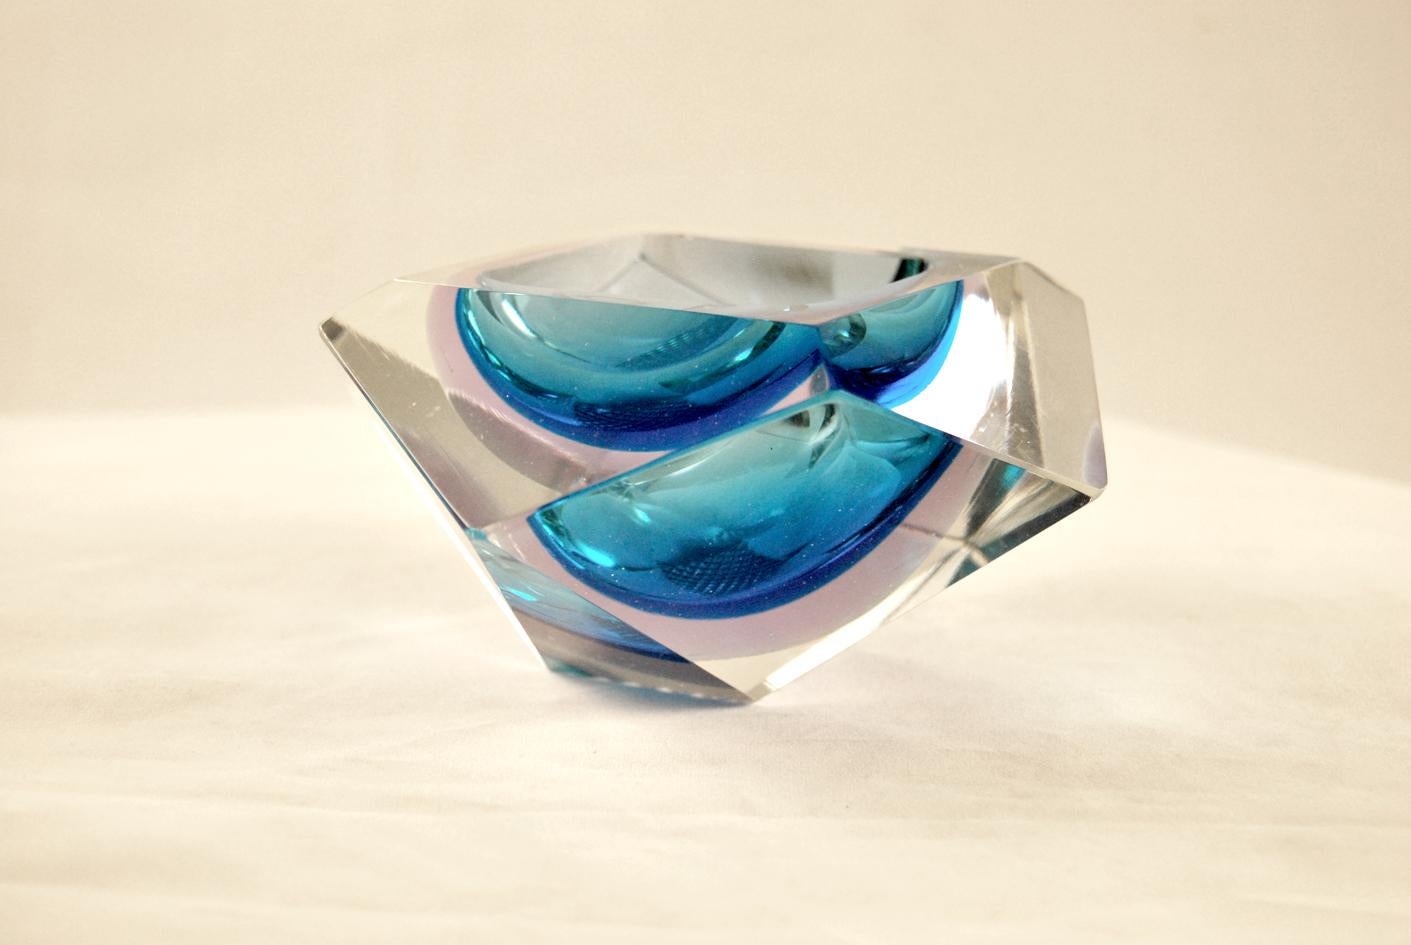 Splendido posacenere svuotatasche in vetro sommerso di Murano, anni '70
The 'pentagon-shaped object, is finely crafted with various facets that create beautiful color reflections between blue and seawater. Perfect condition, like new.
SUBMERGED. It